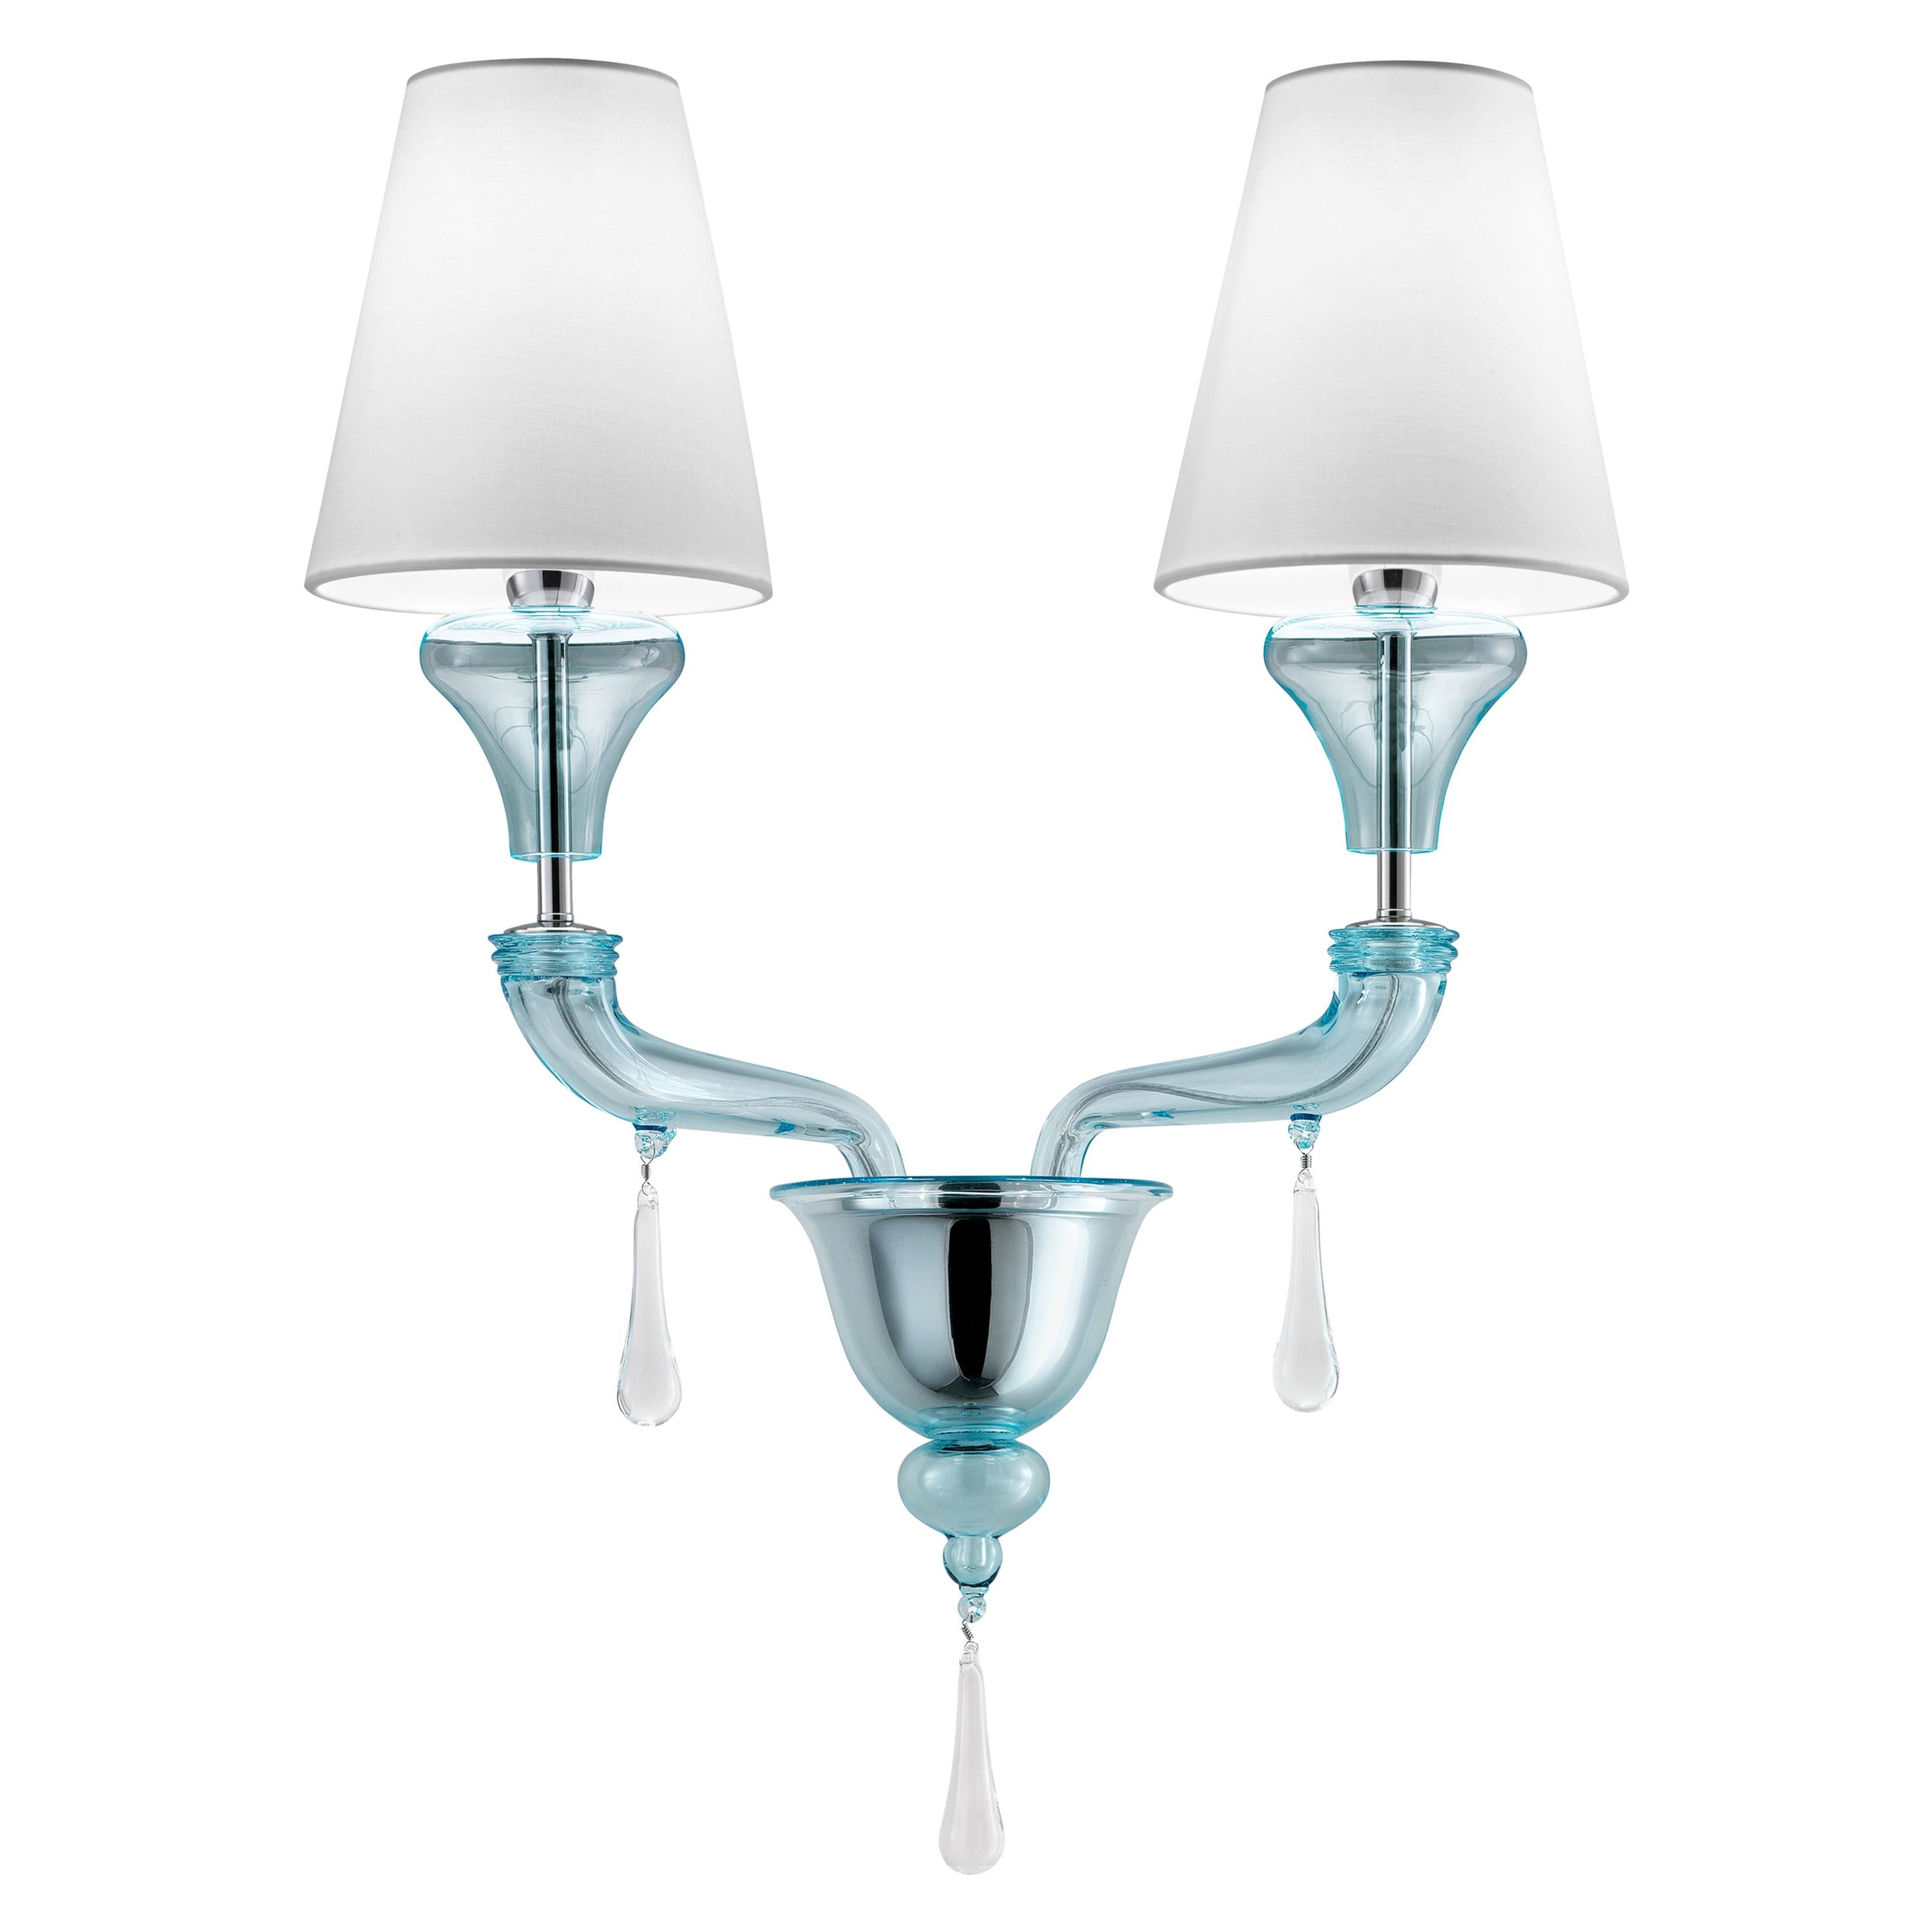 Blue (Aquamarine_AQ) Nevada 5549 02 Wall Scone in Glass with White Shade, by Barovier&Toso